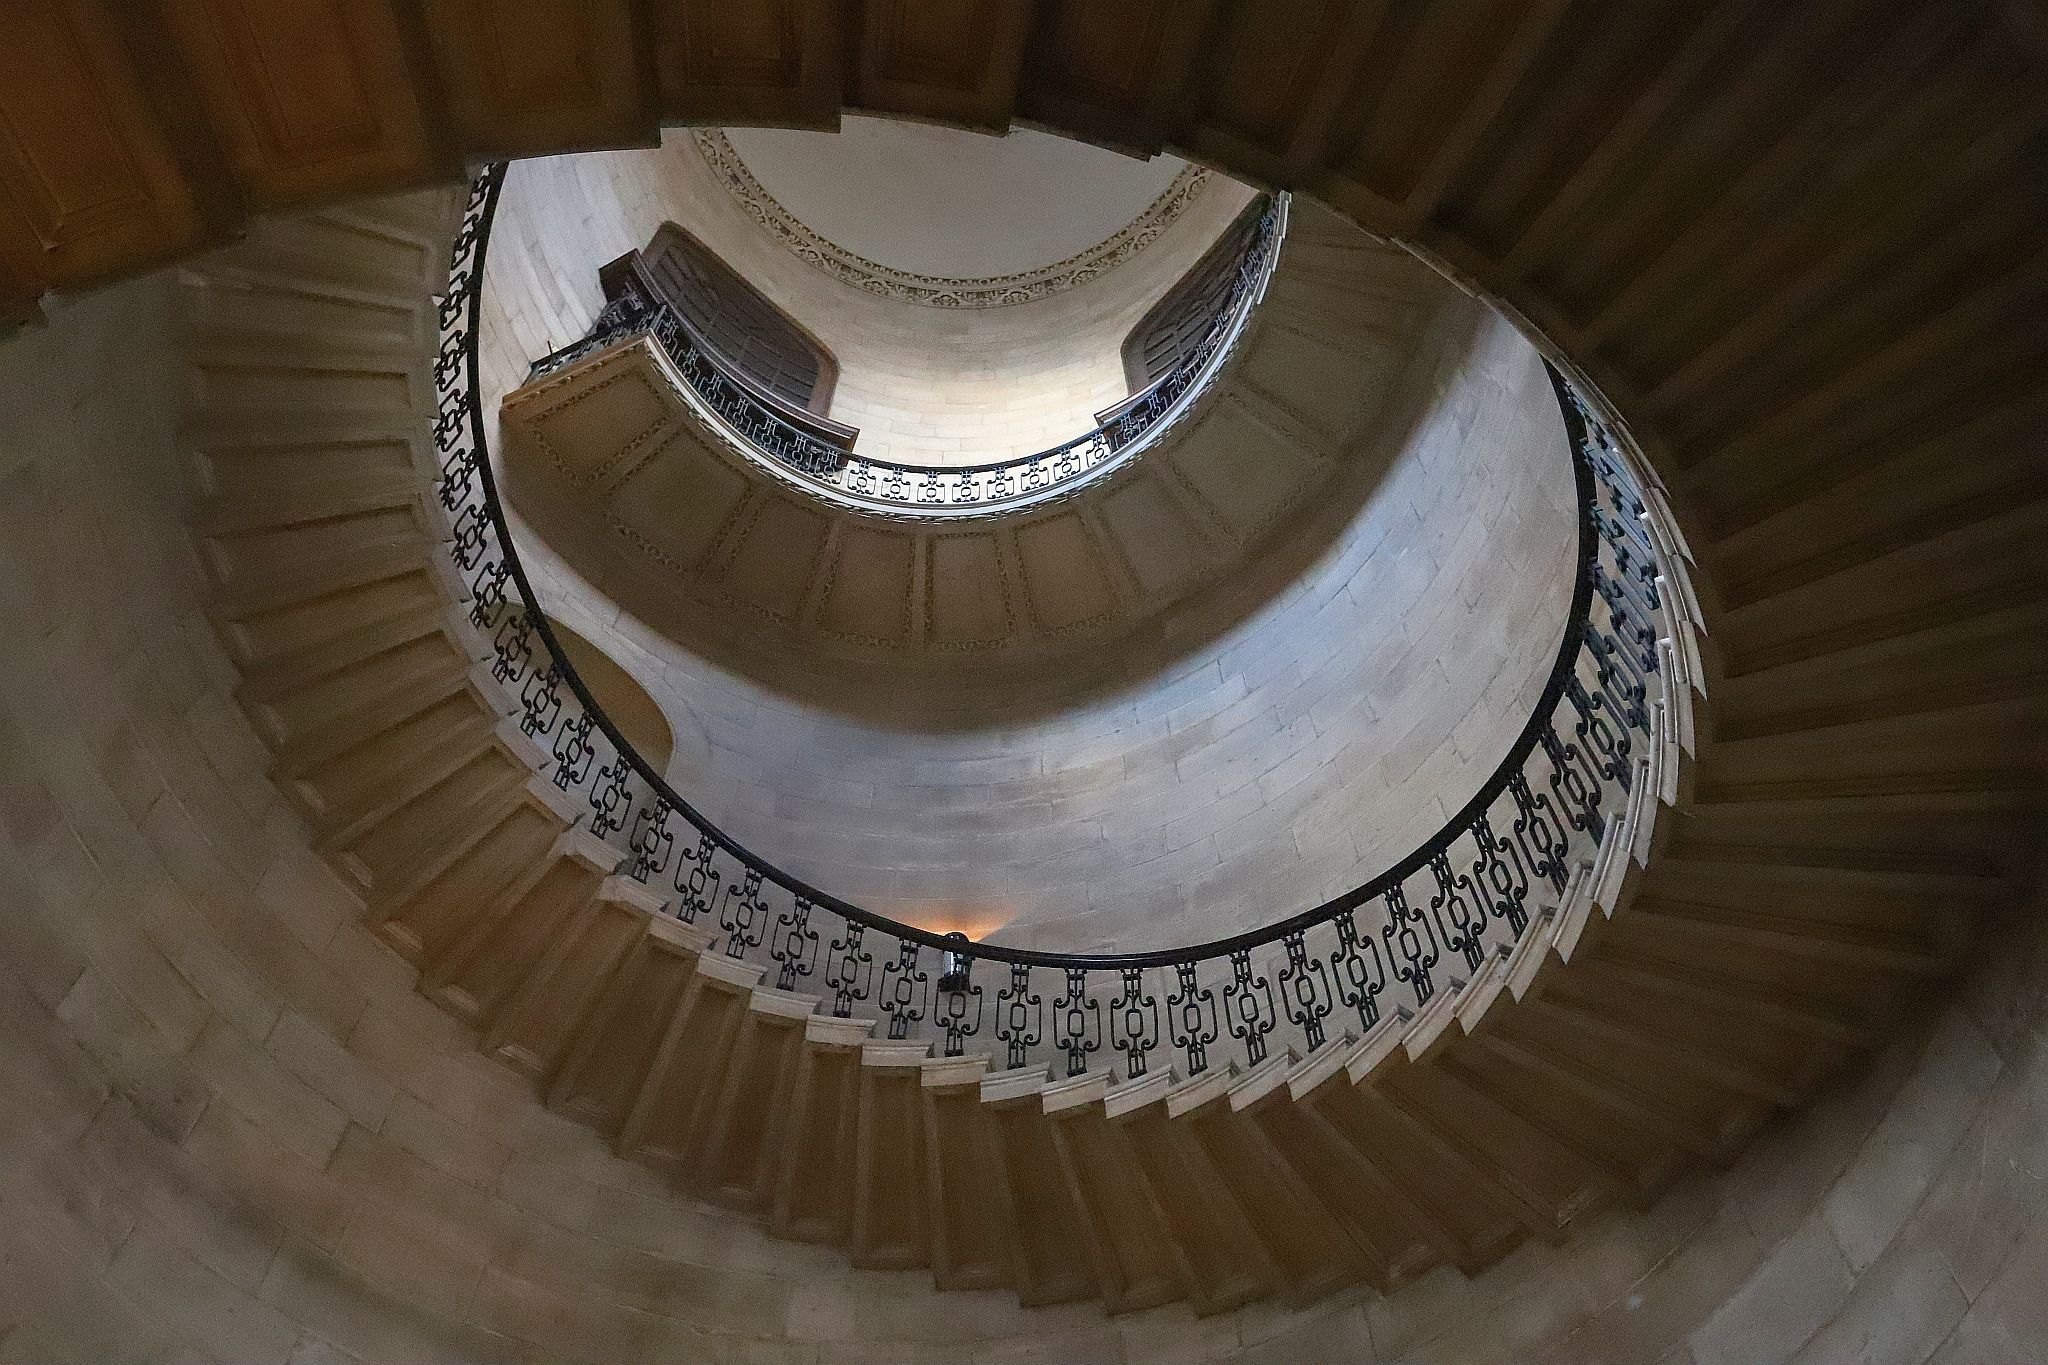 Sir Christopher Wren's Geometric Staircase in St Paul's Cathedral's South West tower, known to Harry Potter film fans as the Devination Stairwell. 24-Aug-2023.